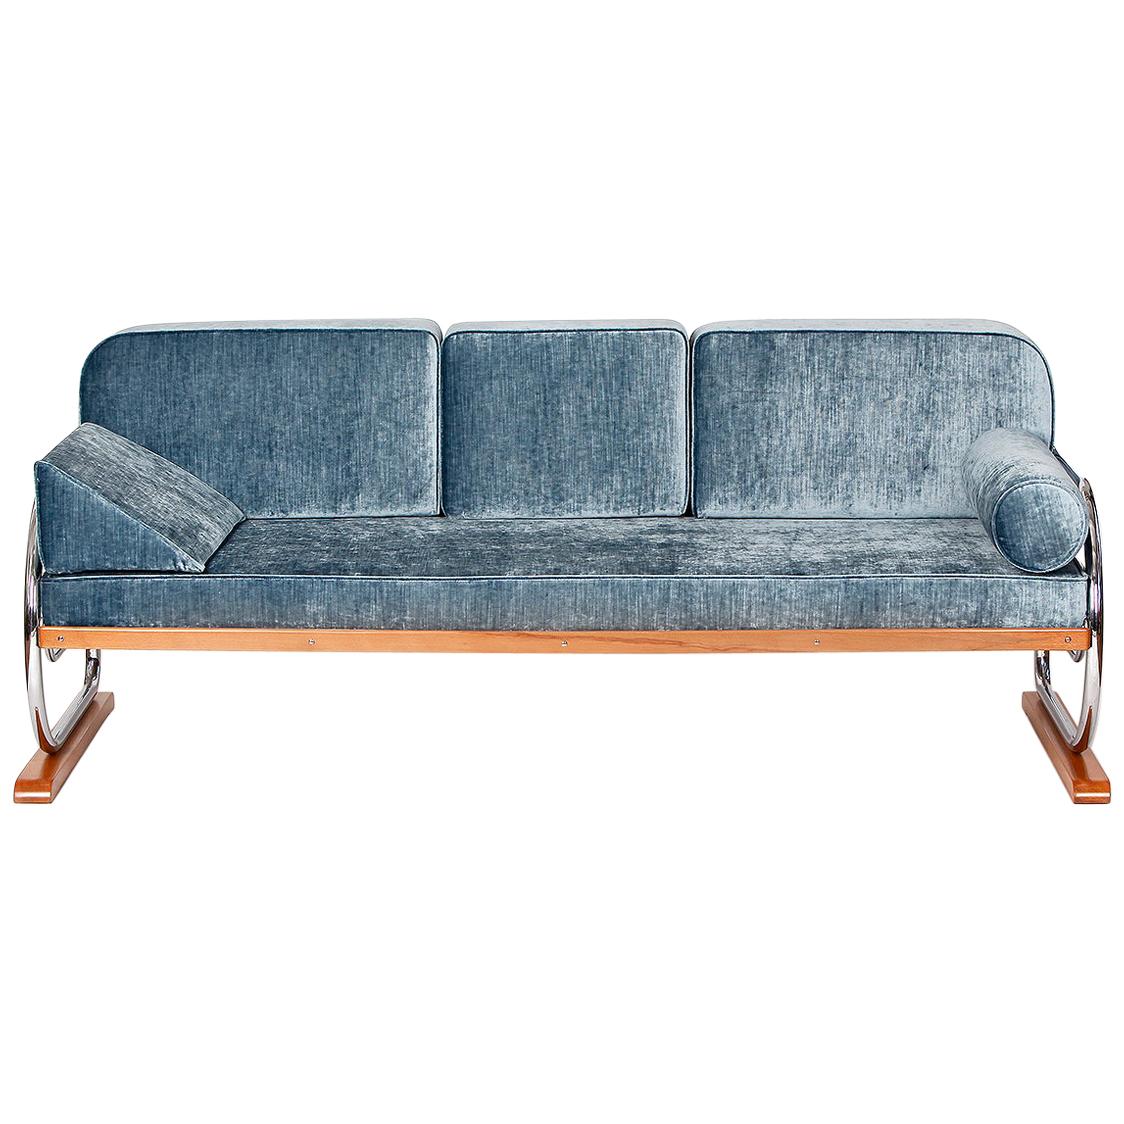 Art Deco Tubular Steel Couch Daybed from H. Gottwald, 1930s